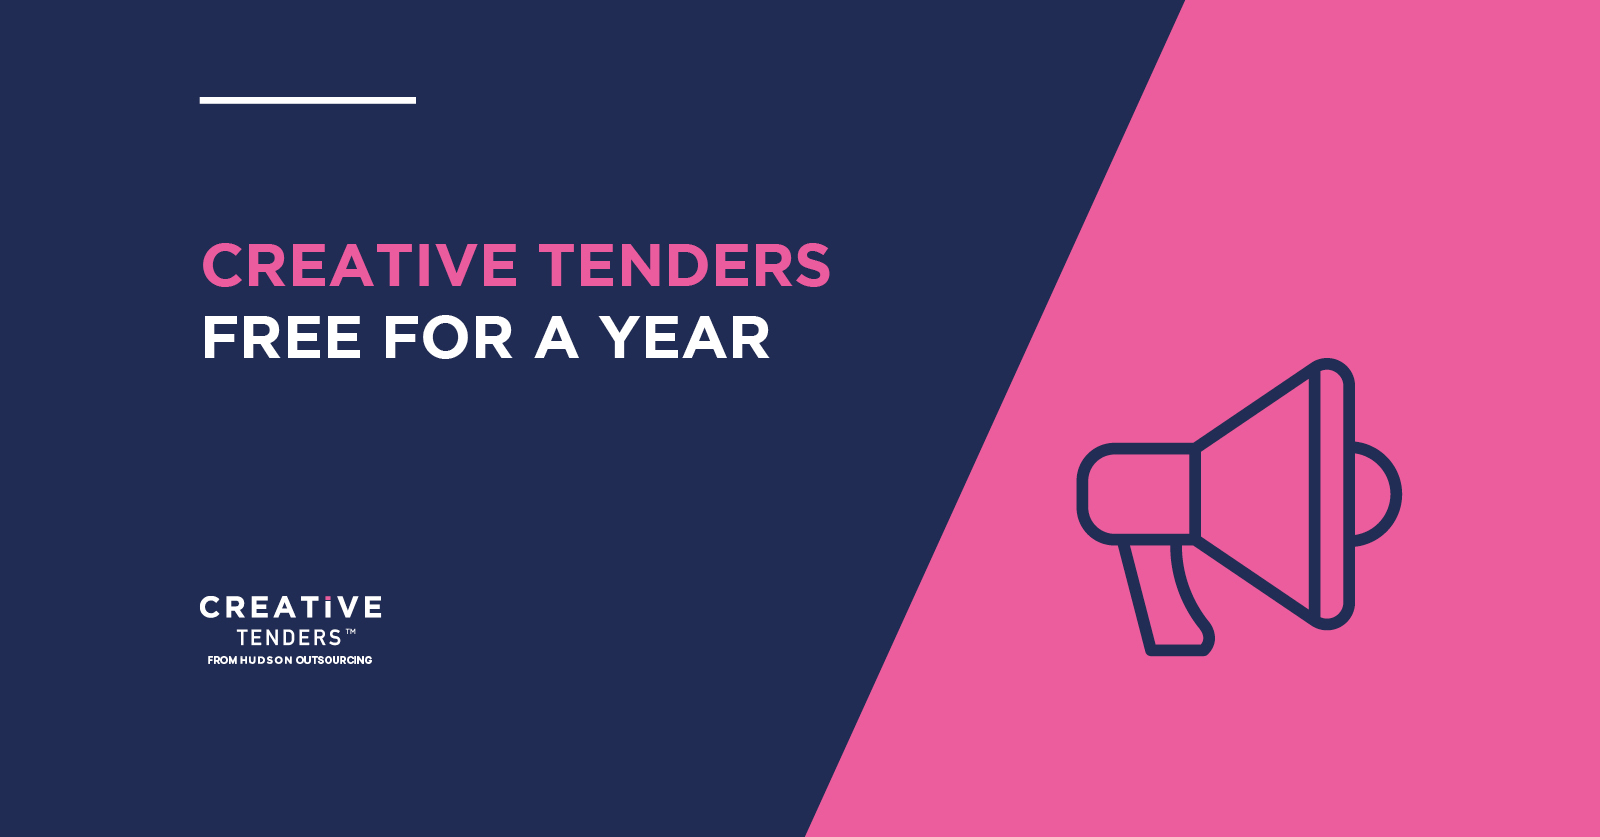 Creative Tenders free for a year